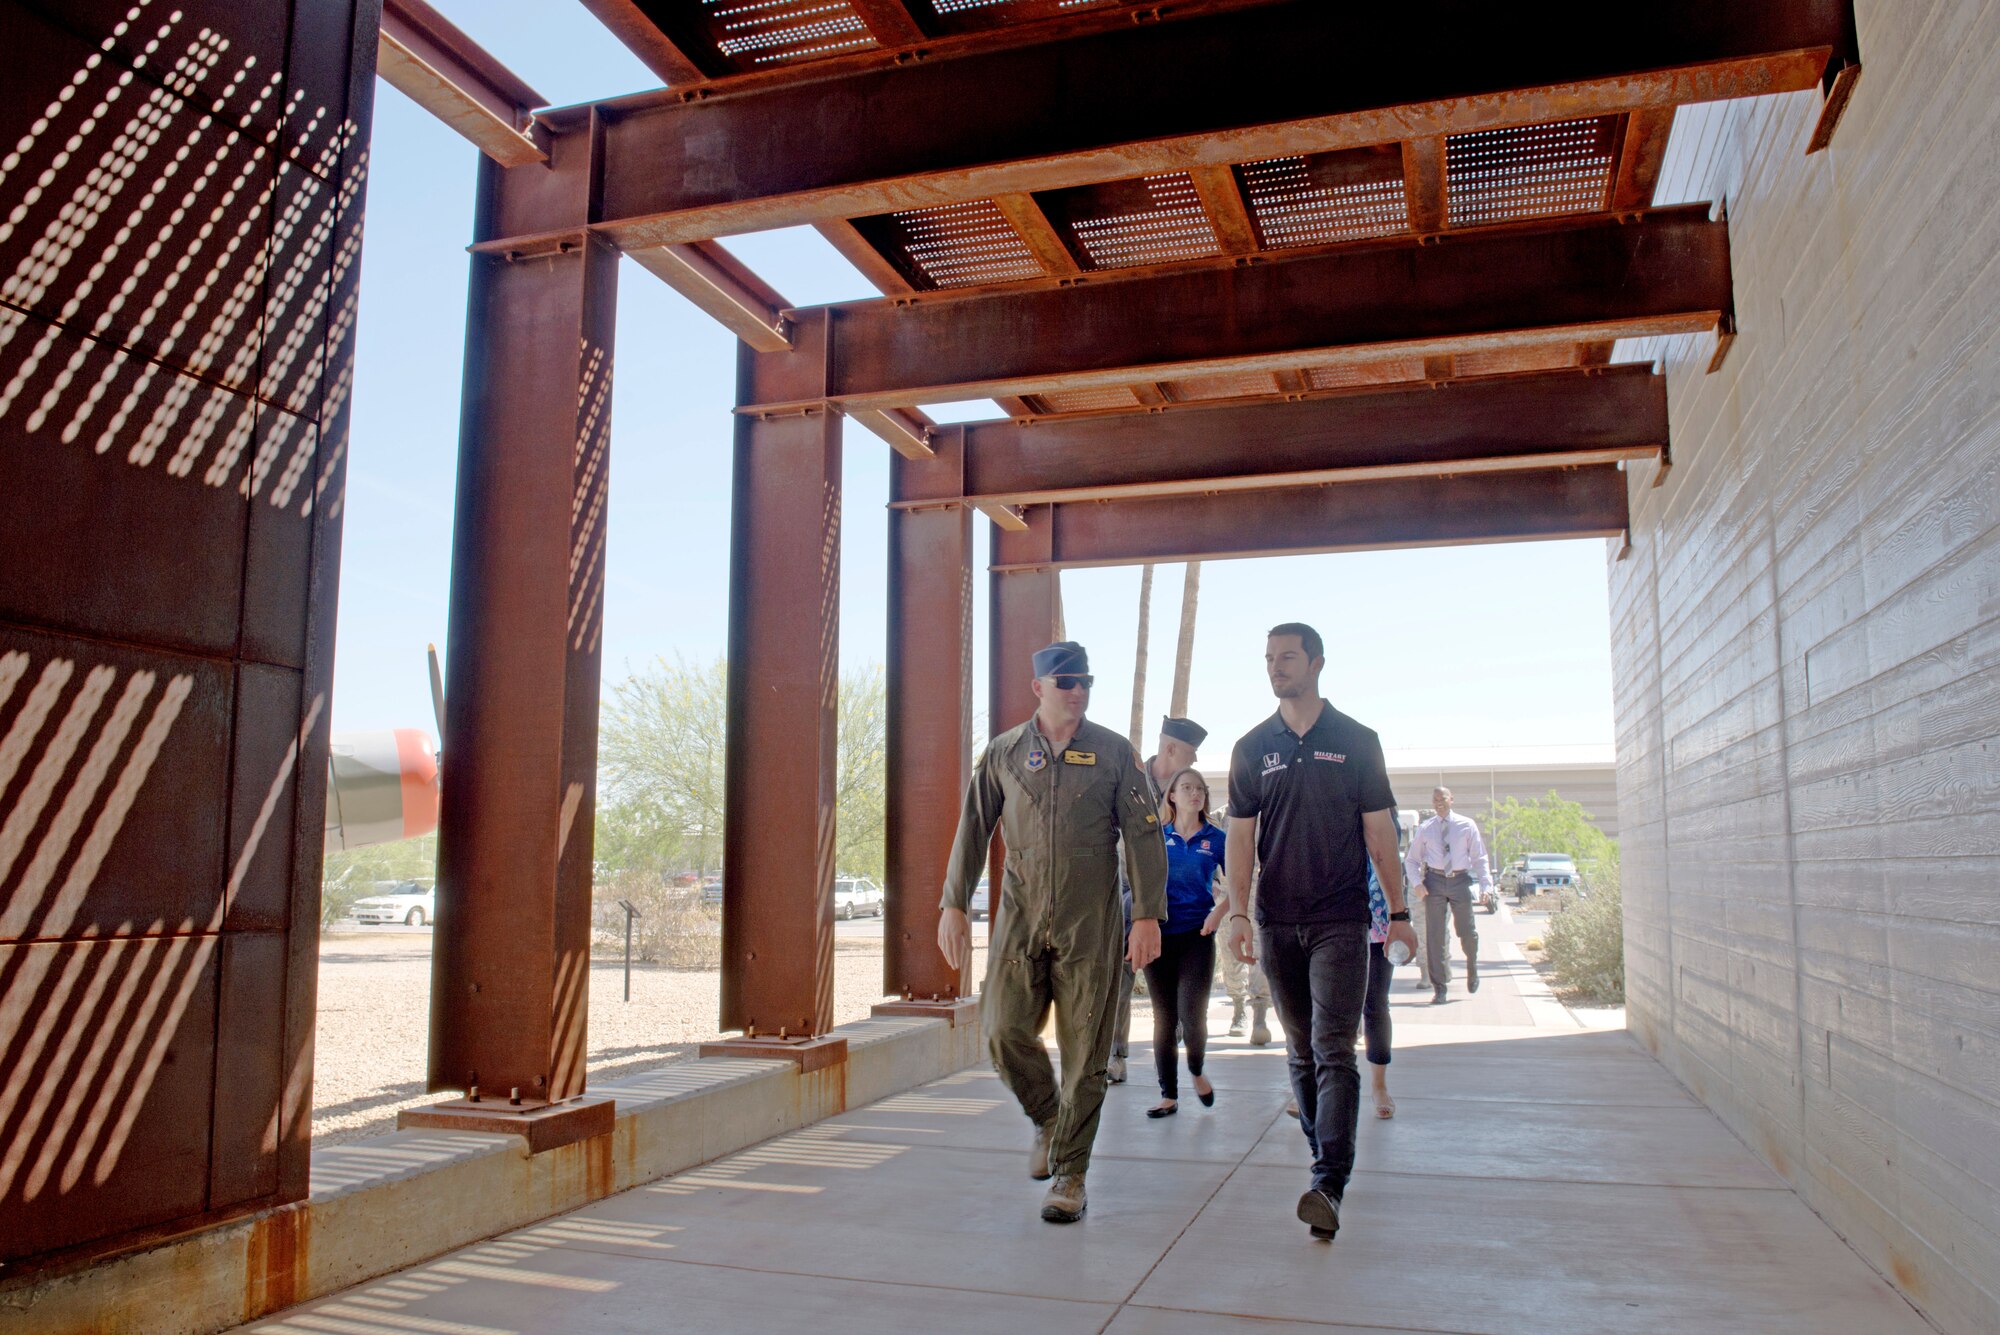 Lt. Col. Rhett Hierlmeier, 61st Fighter Squadron commander; and Alexander Rossi, Andretti Autosport racecar driver, walk through the entrance to the 61st FS operations building at Luke Air Force Base, Ariz., April 5, 2018. Rossi and other delegates from Andretti Autosport learned about the lives and work of pilots, maintainers and other Airmen who support the mission to build the future of airpower. (U.S. Air Force photo by Senior Airman Ridge Shan)